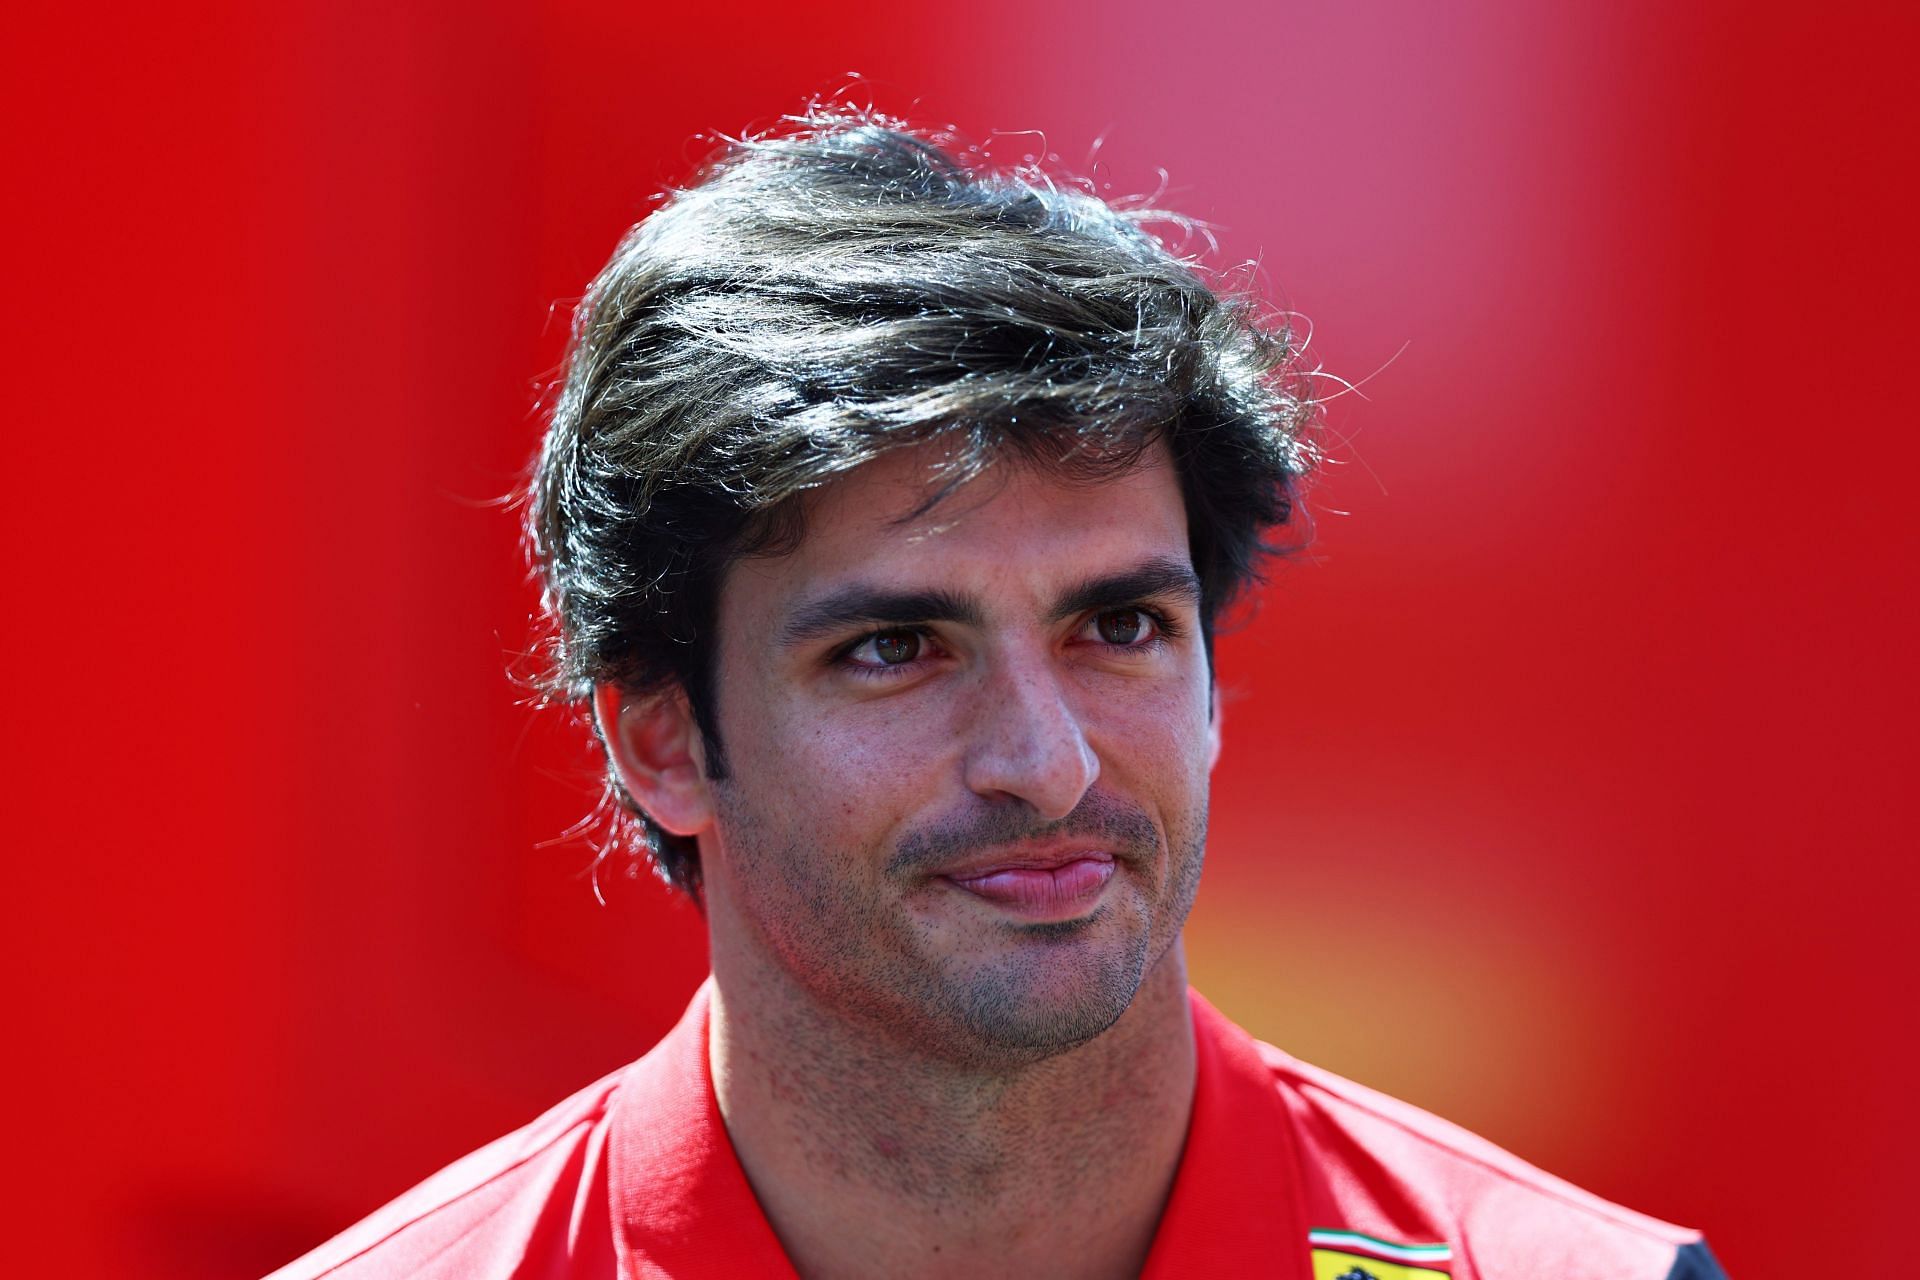 Carlos Sainz feels a discussion needs to be had around the physical impact of the new cars